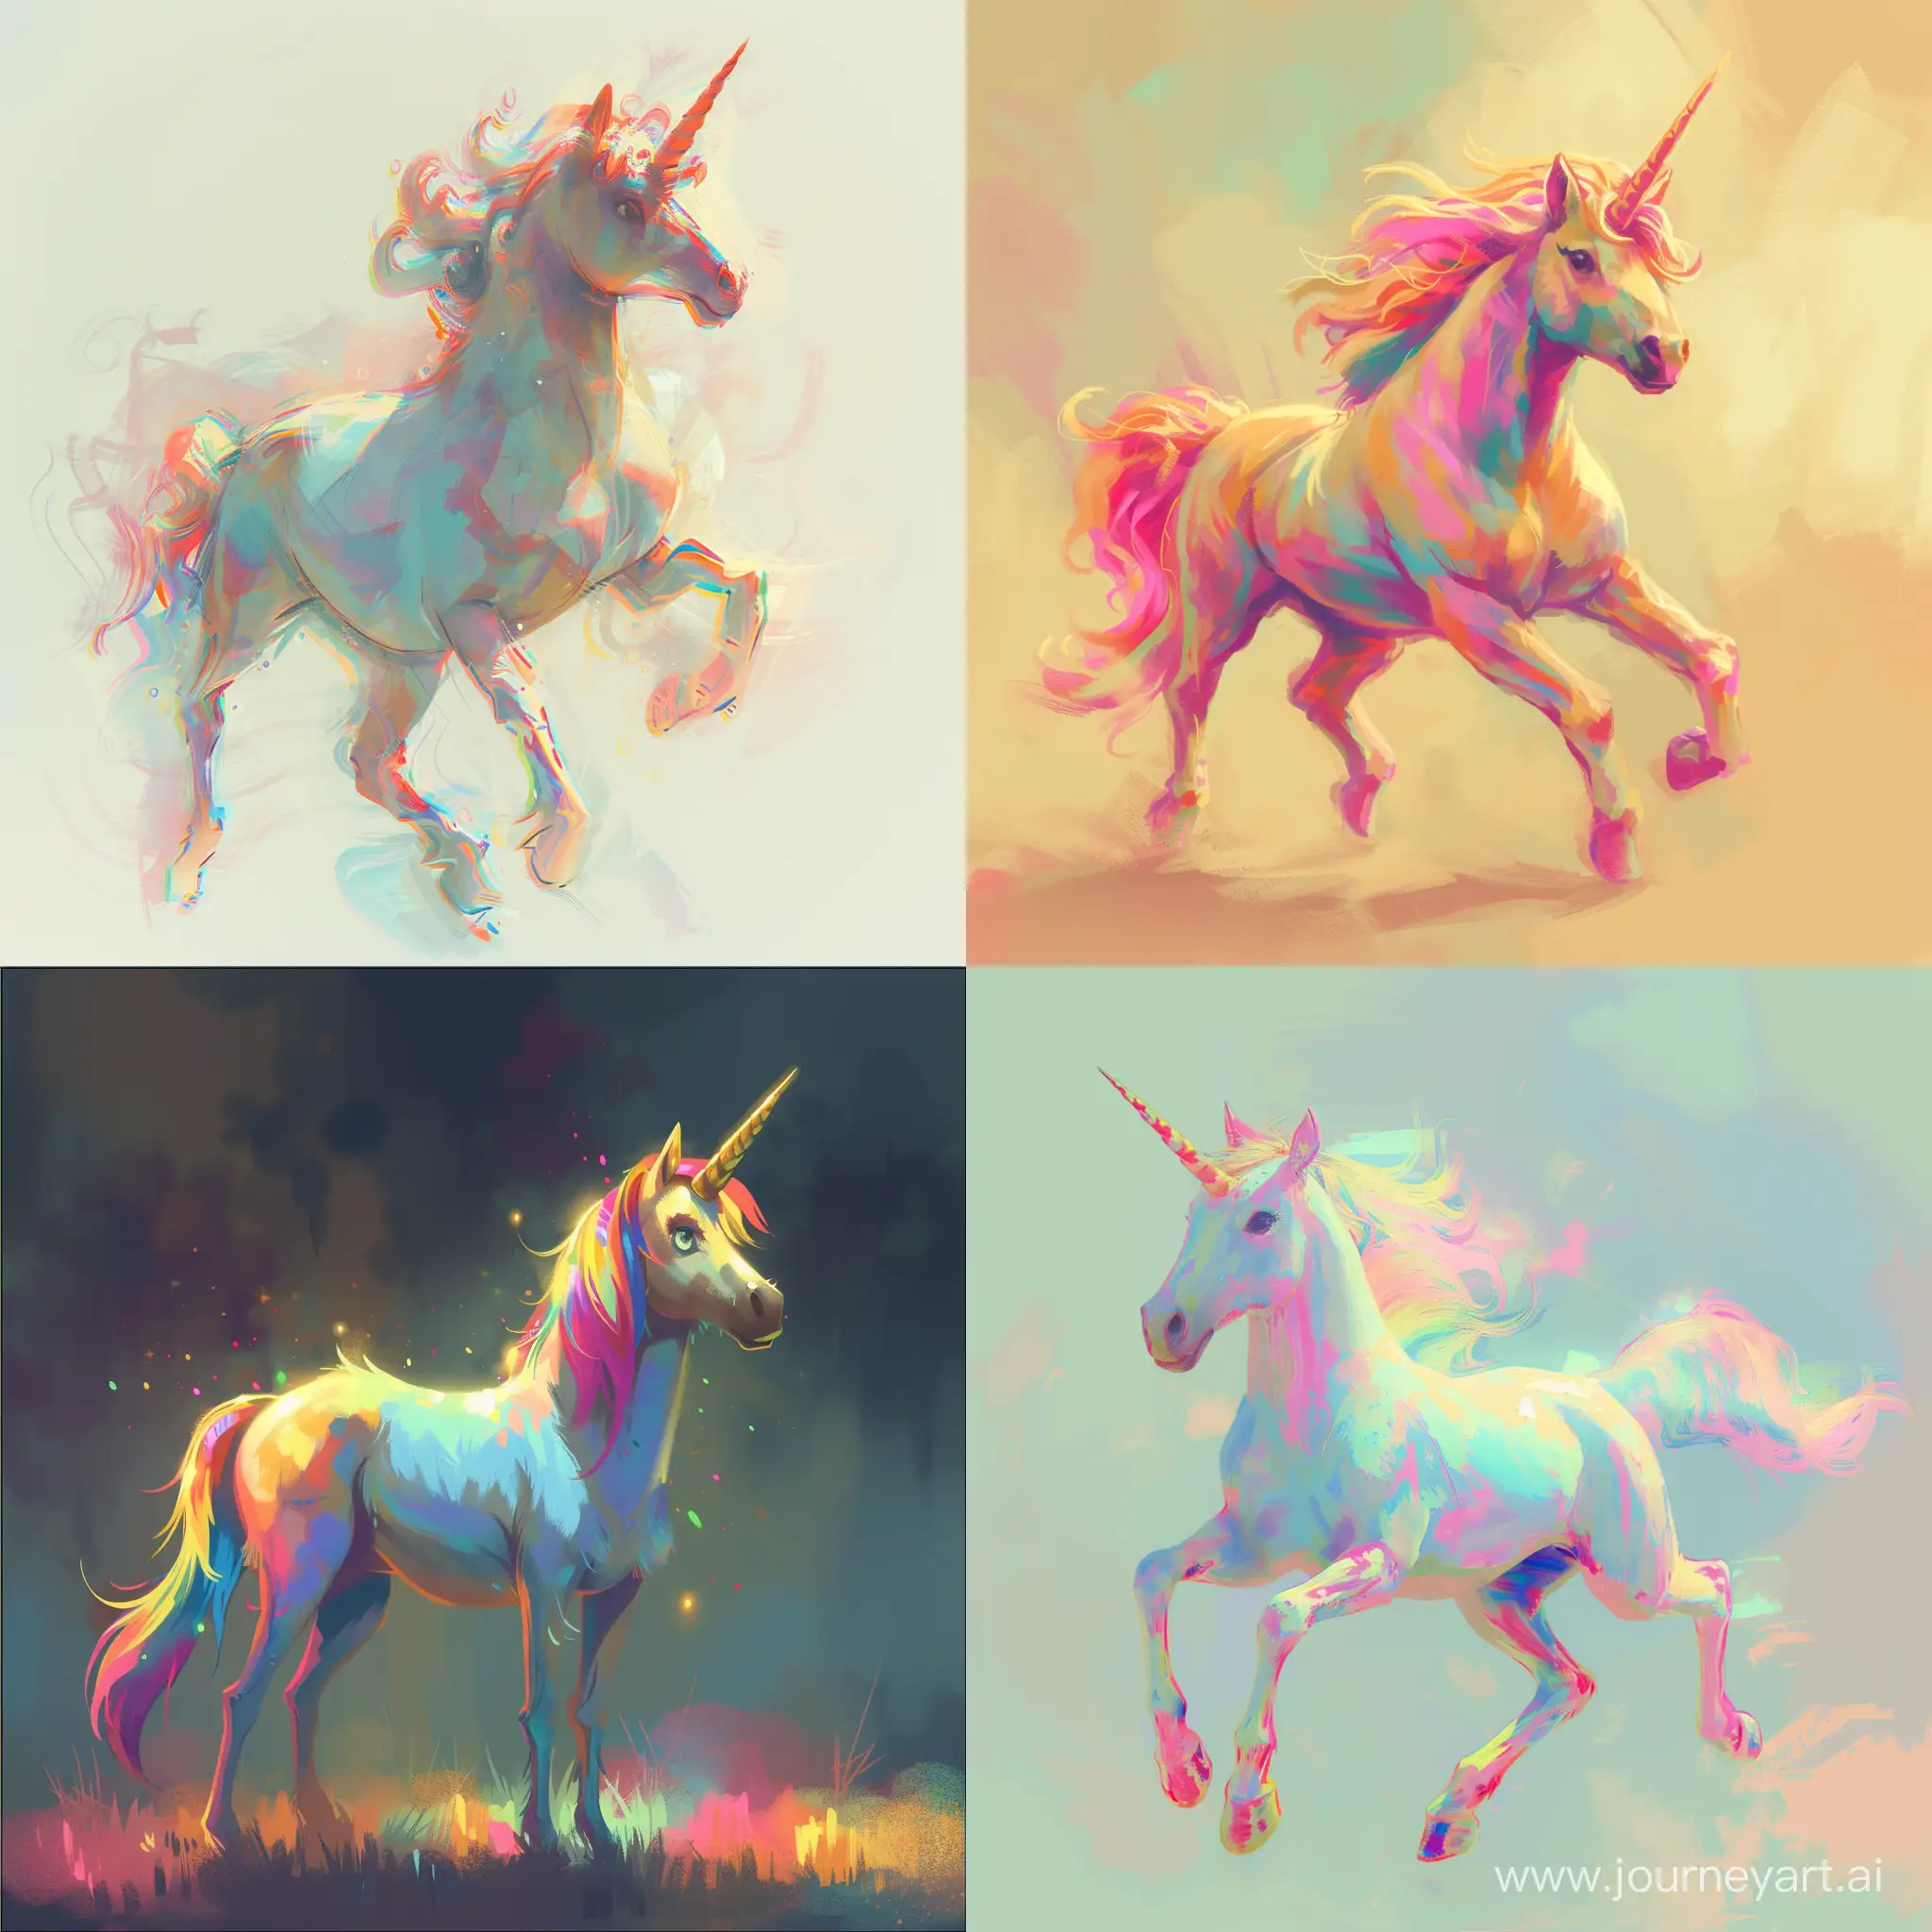 a medium quality digital illustration of a crazy unicorn with its full body visible, inspired by the style of Gravity Falls, featuring minimal detailing and soft light. The artwork is characterized by a vibrant color palette, bringing the unicorn to life in a whimsical and playful manner. --v 6 --ar 1:1 --no 84916